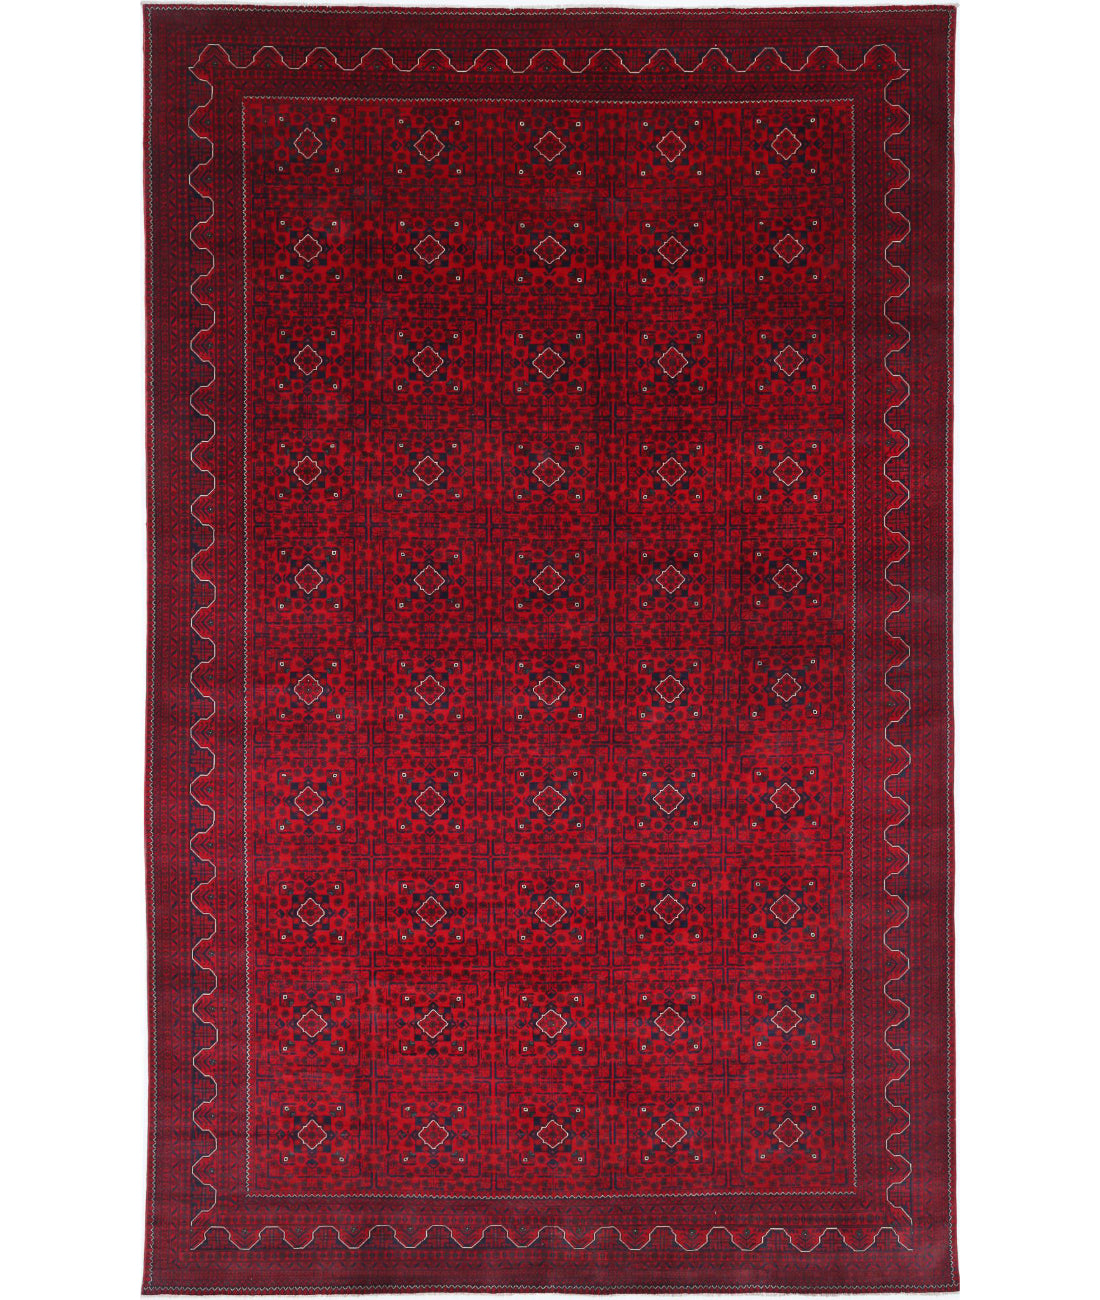 Afghan 10'1'' X 16'0'' Hand-Knotted Wool Rug 10'1'' x 16'0'' (303 X 480) / Red / N/A